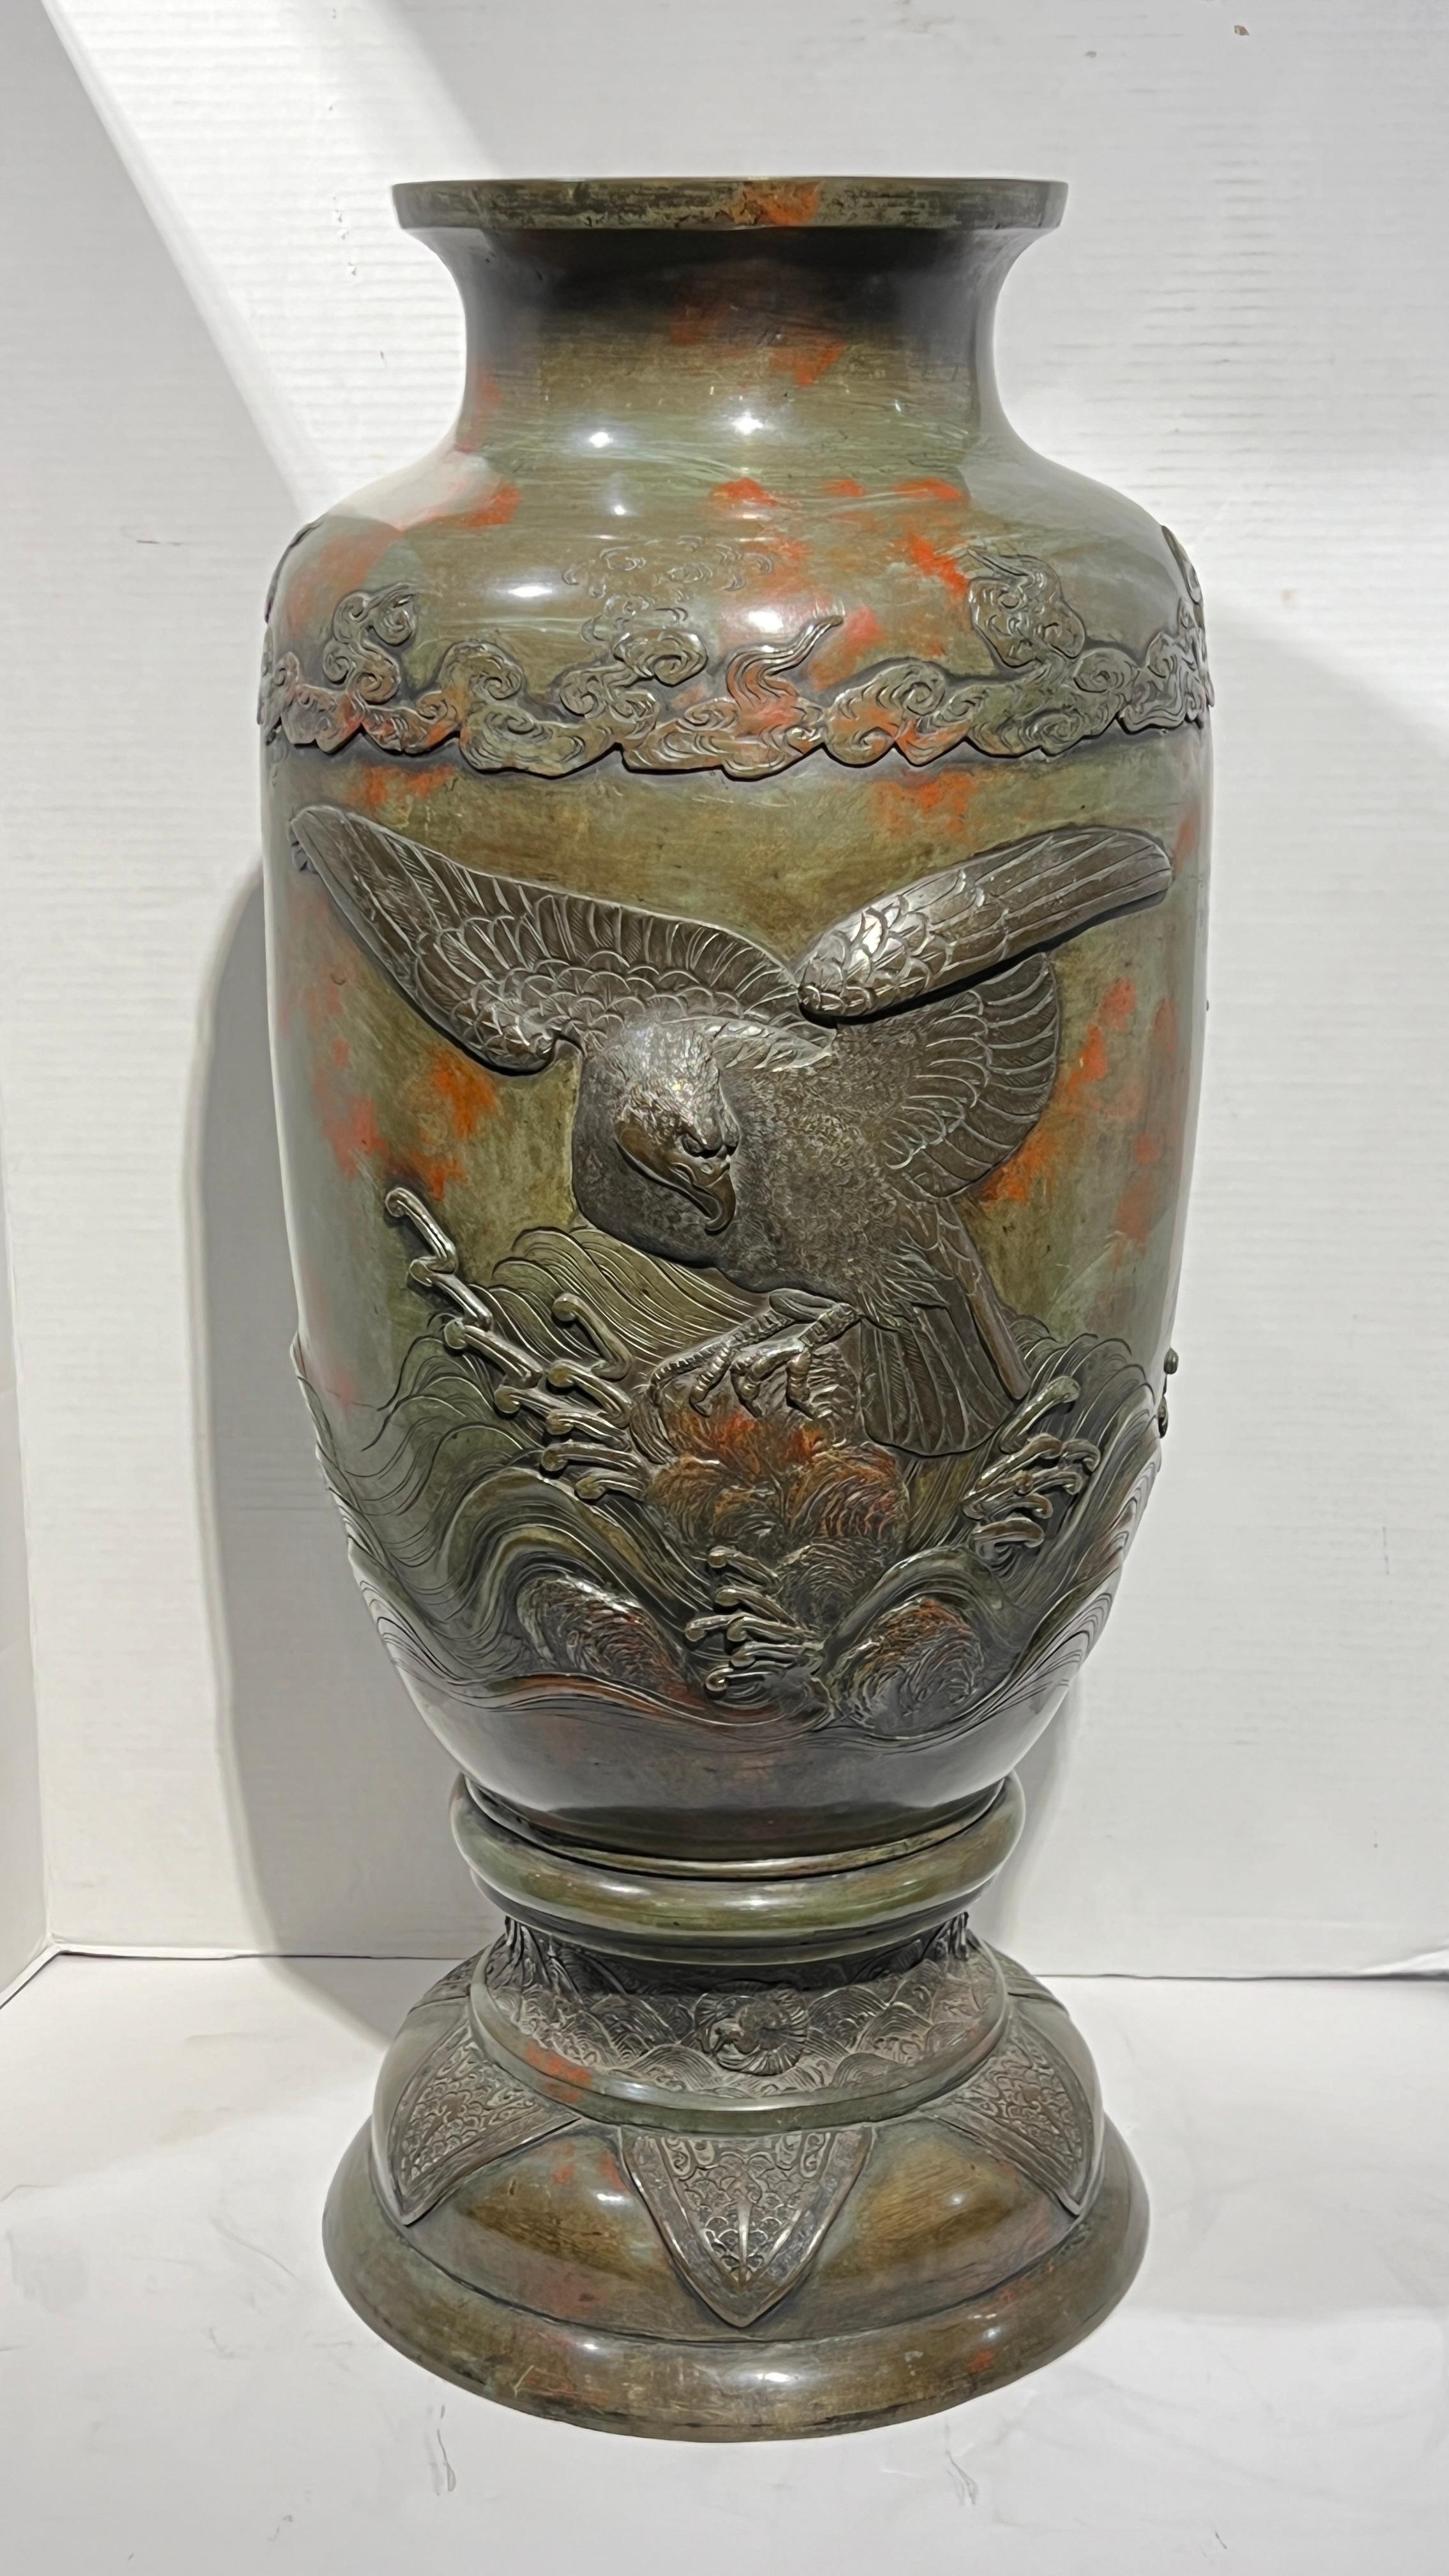 Very special and finely cast bronze vase with large eagle and other birds in relief, with exceptional polychrome patina.  29 1/4 inches.  See our other listing for a very similar vase, as they would make a lovely matched pair.